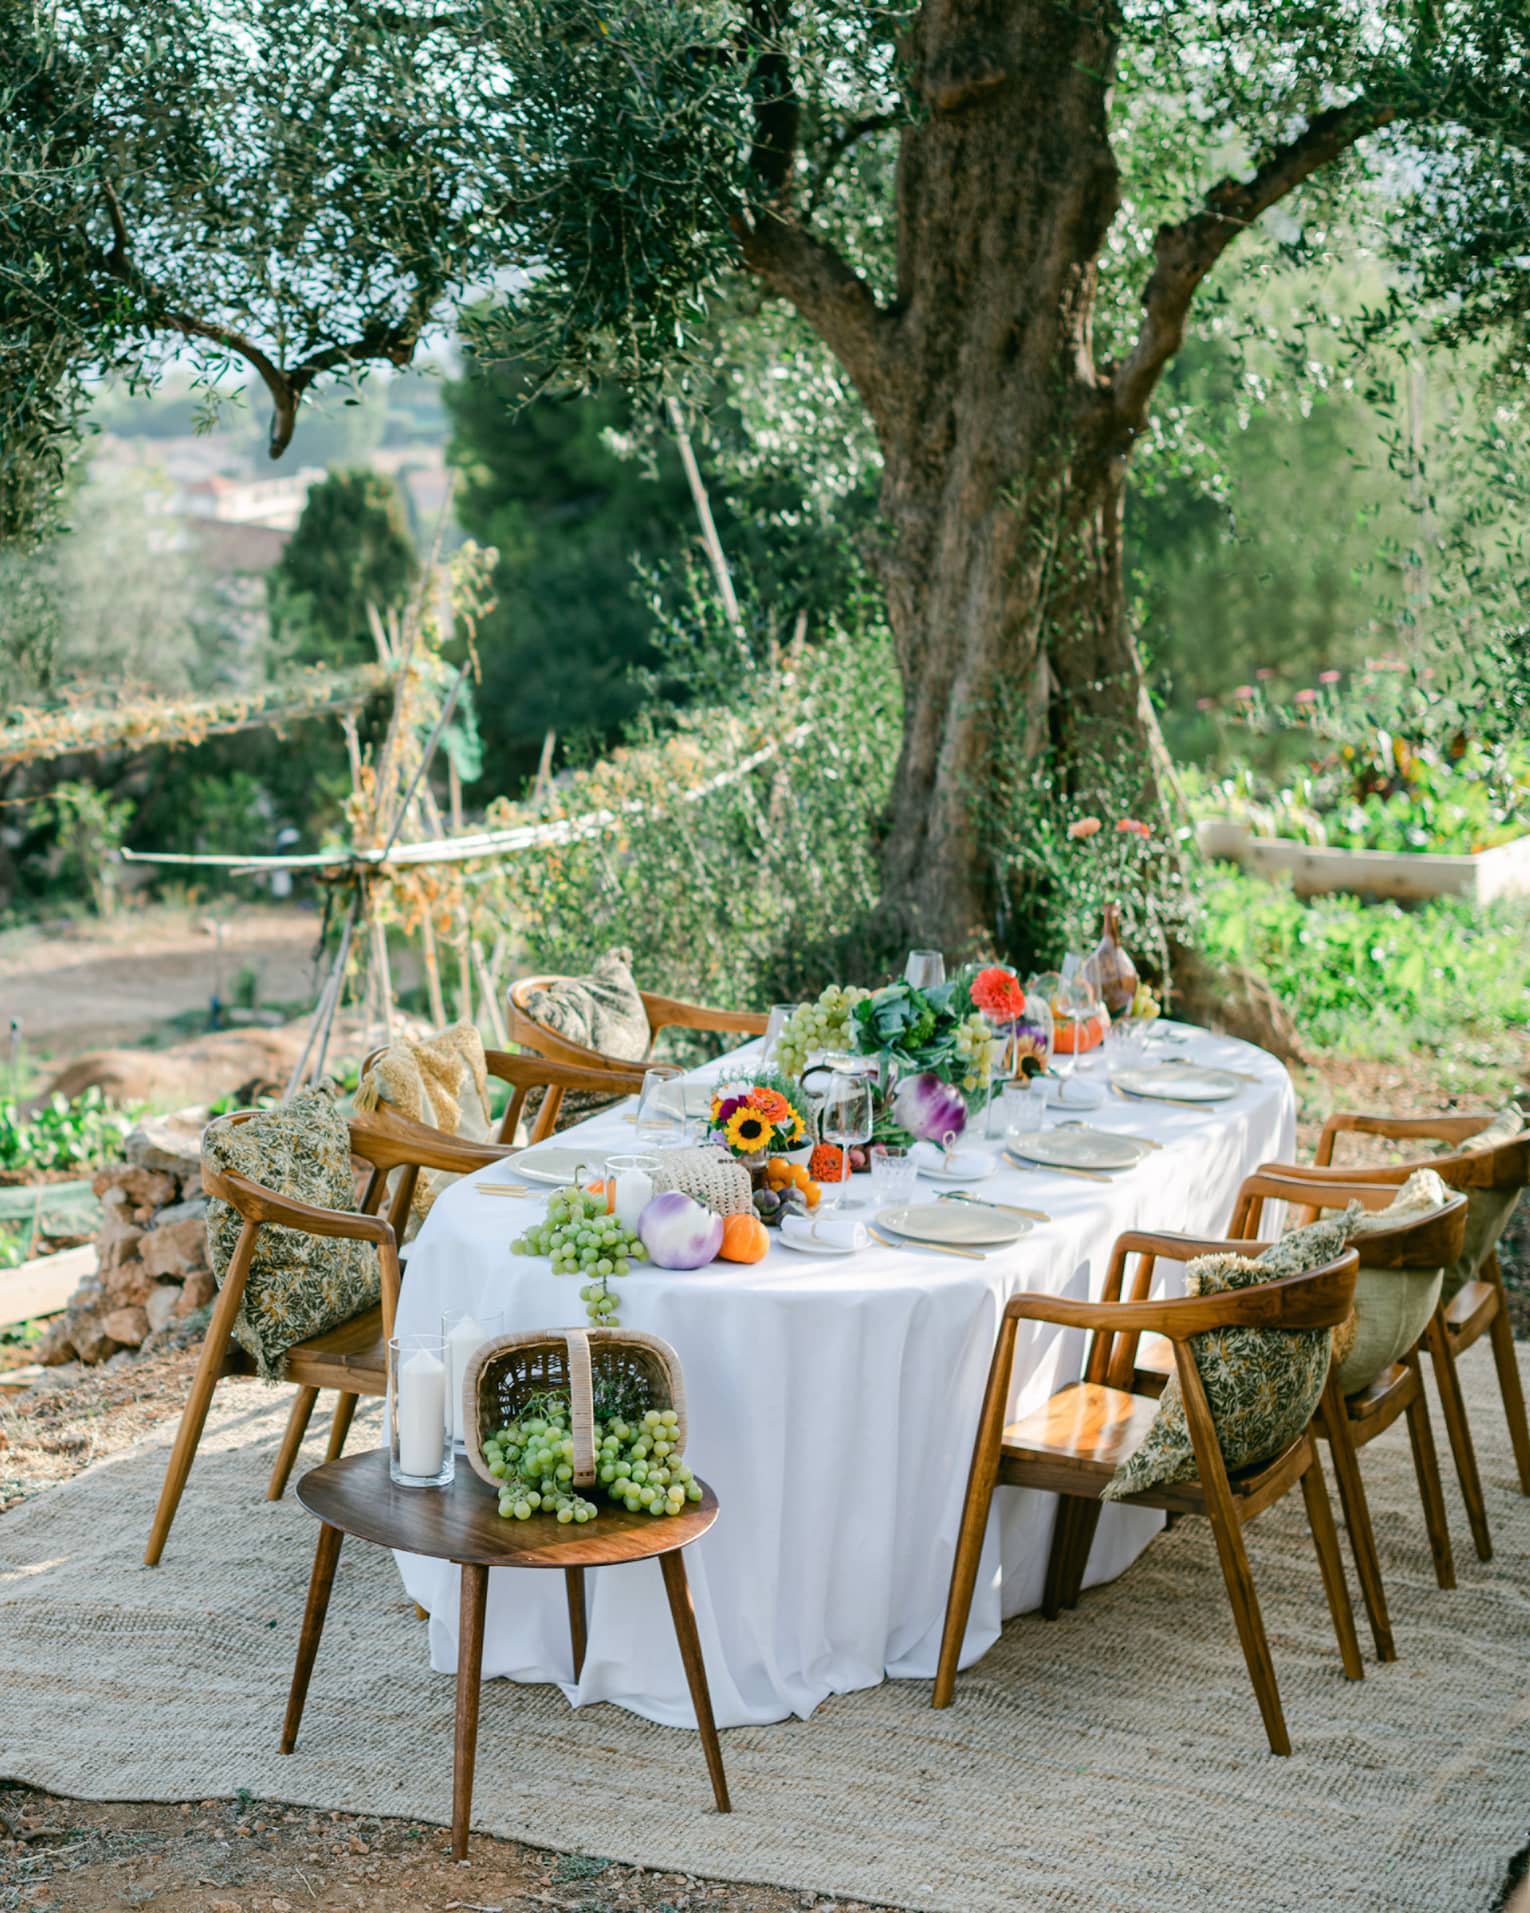 Garden dining setup with oval table draped in white and garden bounty down centre, and six chairs with pillows